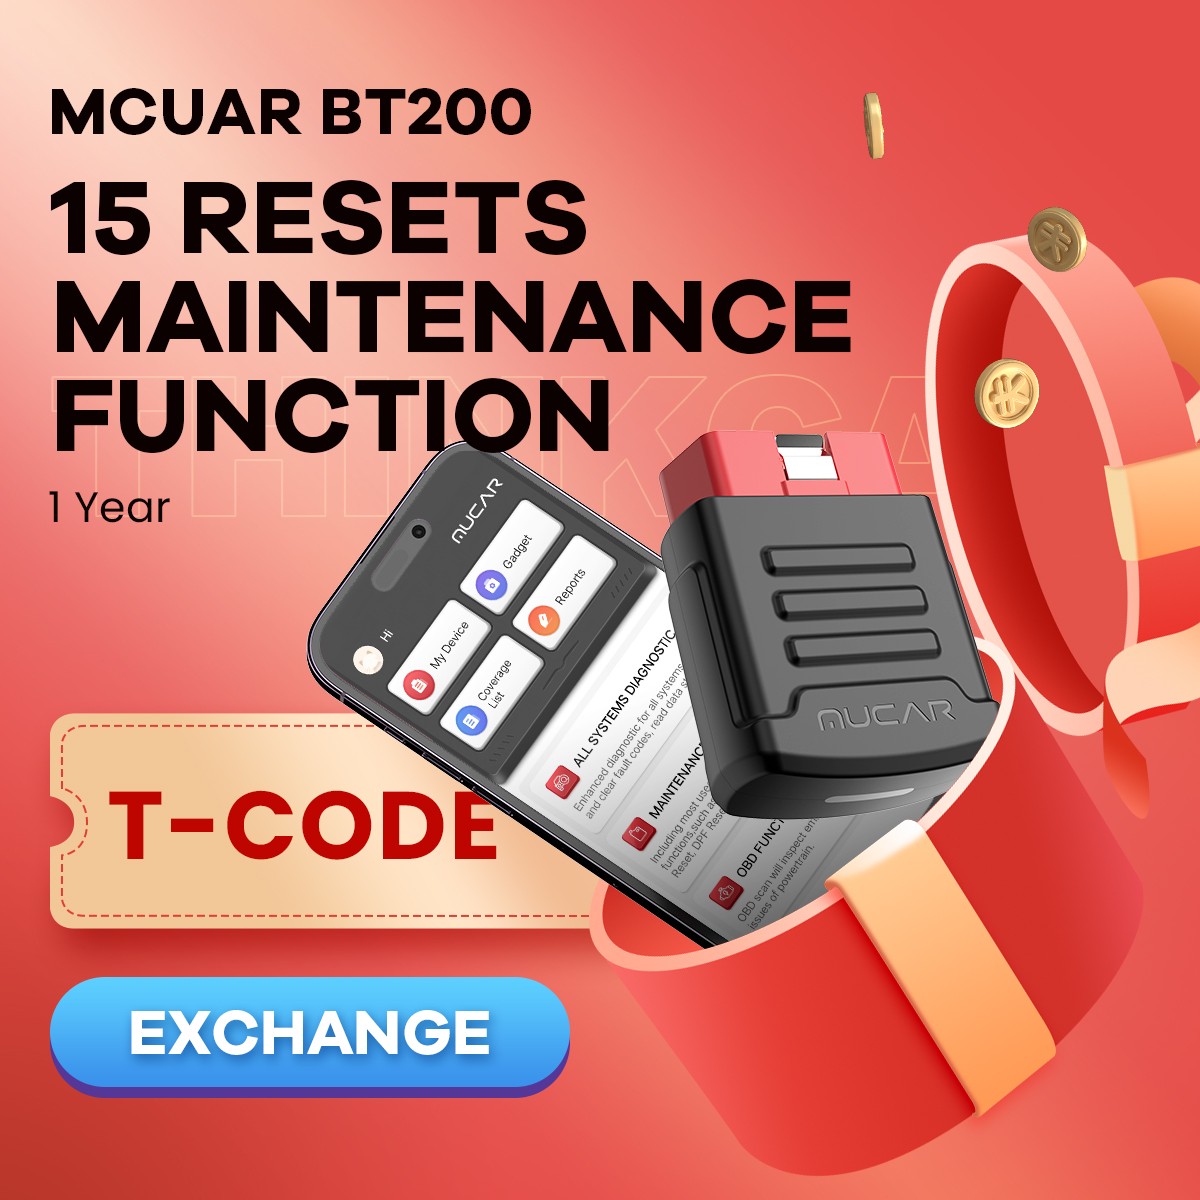 MUCAR BT200 T-CODE 15 Resets Maintenance Function 1 YEAR FREE